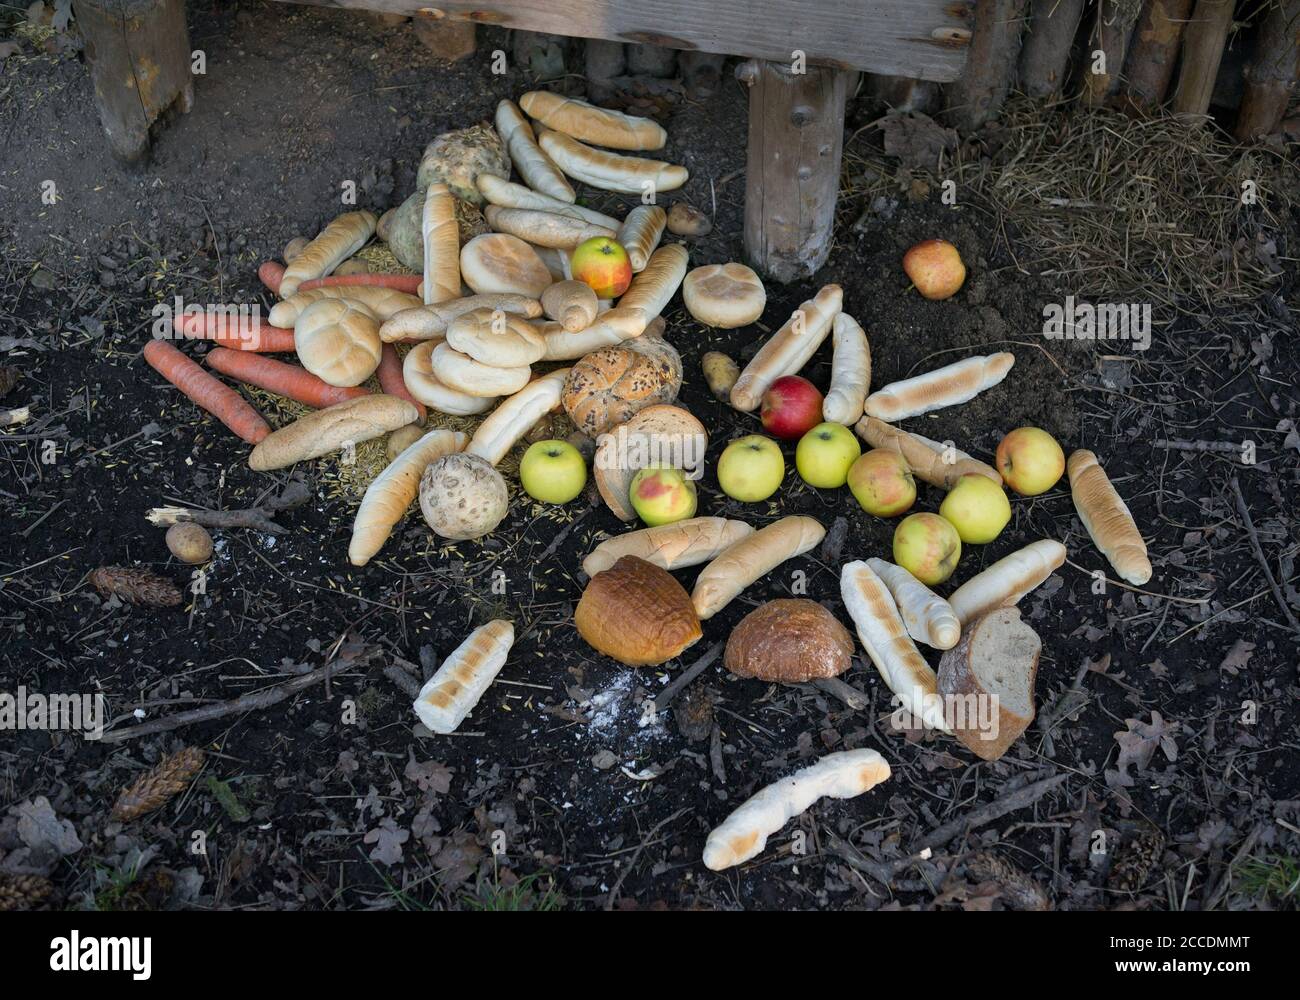 Feeding animal in the forest or farm. Vegetable, fruit, baked goods and bread in the feeder on the ground. Leaves, cones and brances around heap. Stock Photo